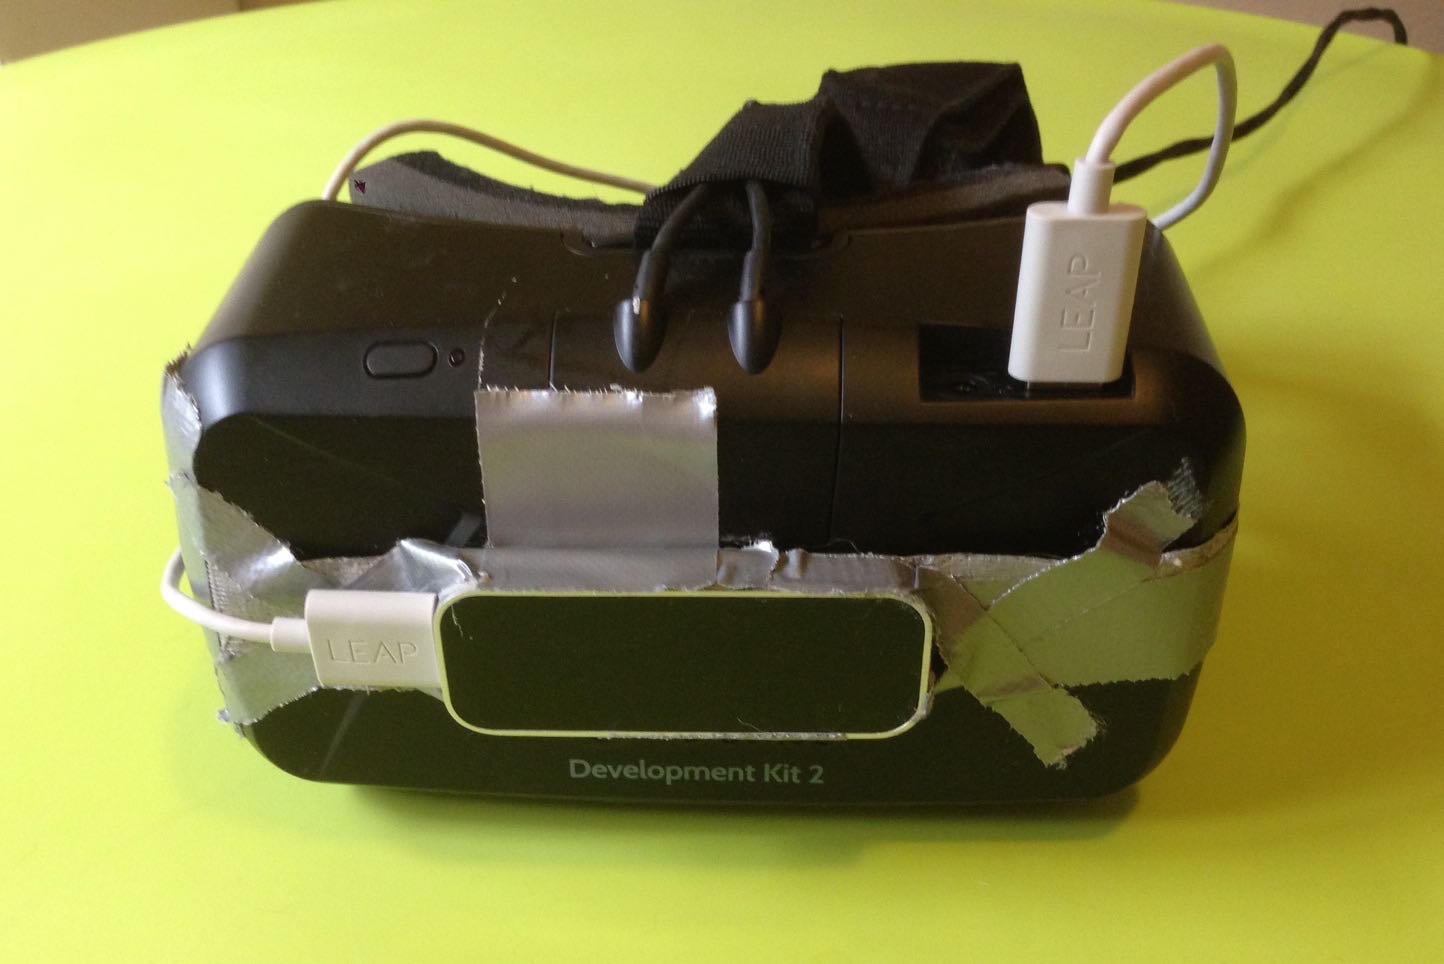 Leap Motion strapped to Oculus Rift